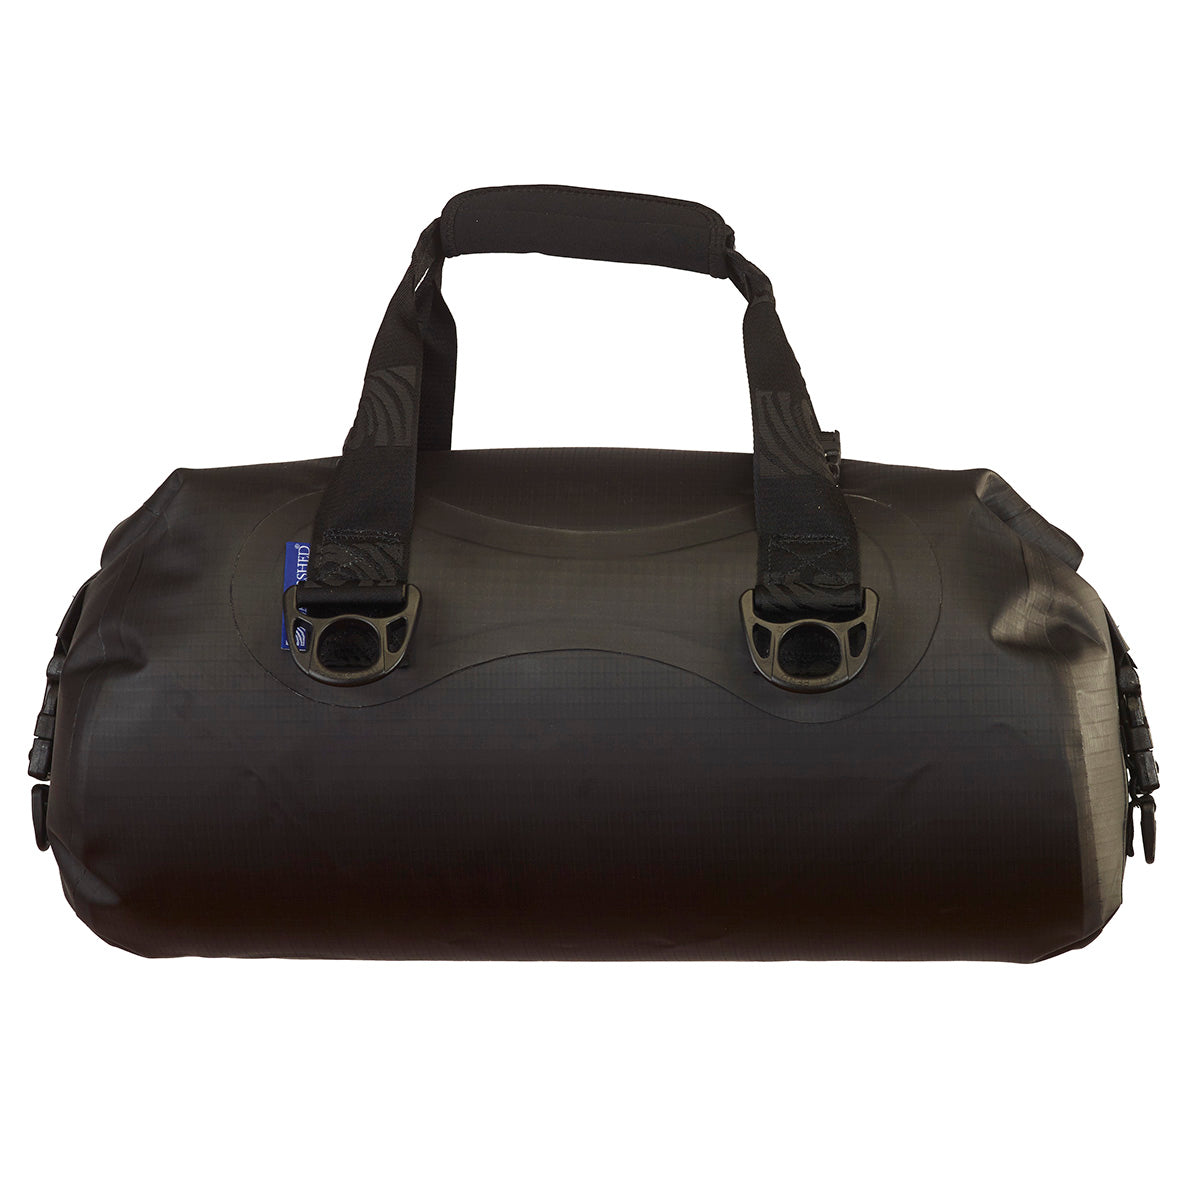 Watershed Chattooga Dry Duffle